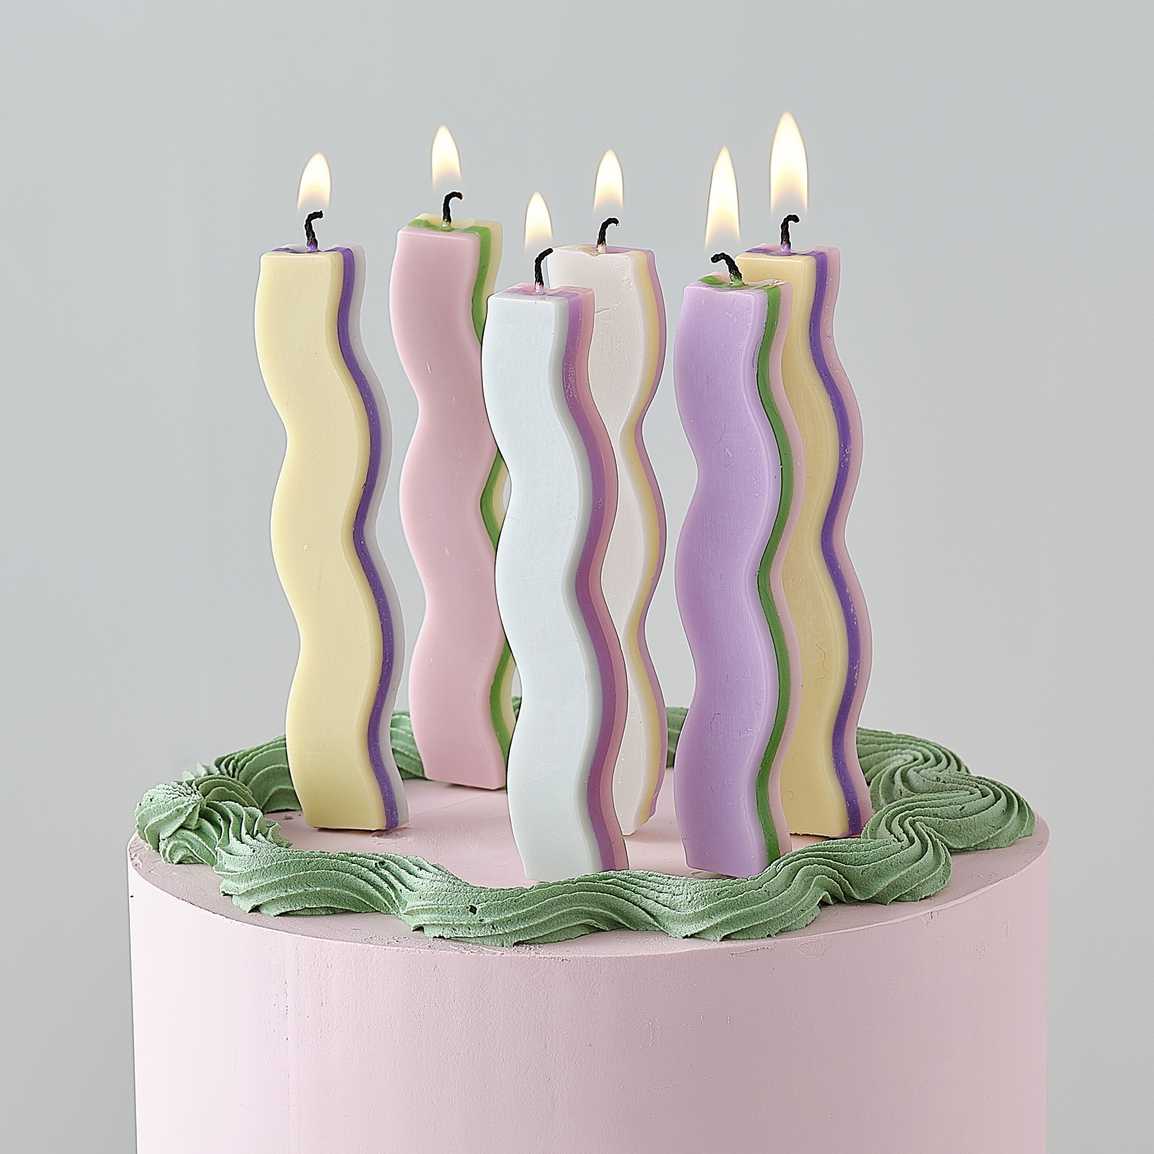 These new cake candles feature a playful, wavy design that adds a unique and modern touch to any celebration.

l8r.it/murw

#cakecandles #birthdaycake #birthdaycandles #pastelwave #pastelcandles #multicolourcandles #gingerray #joliefeteuk #partysupplies